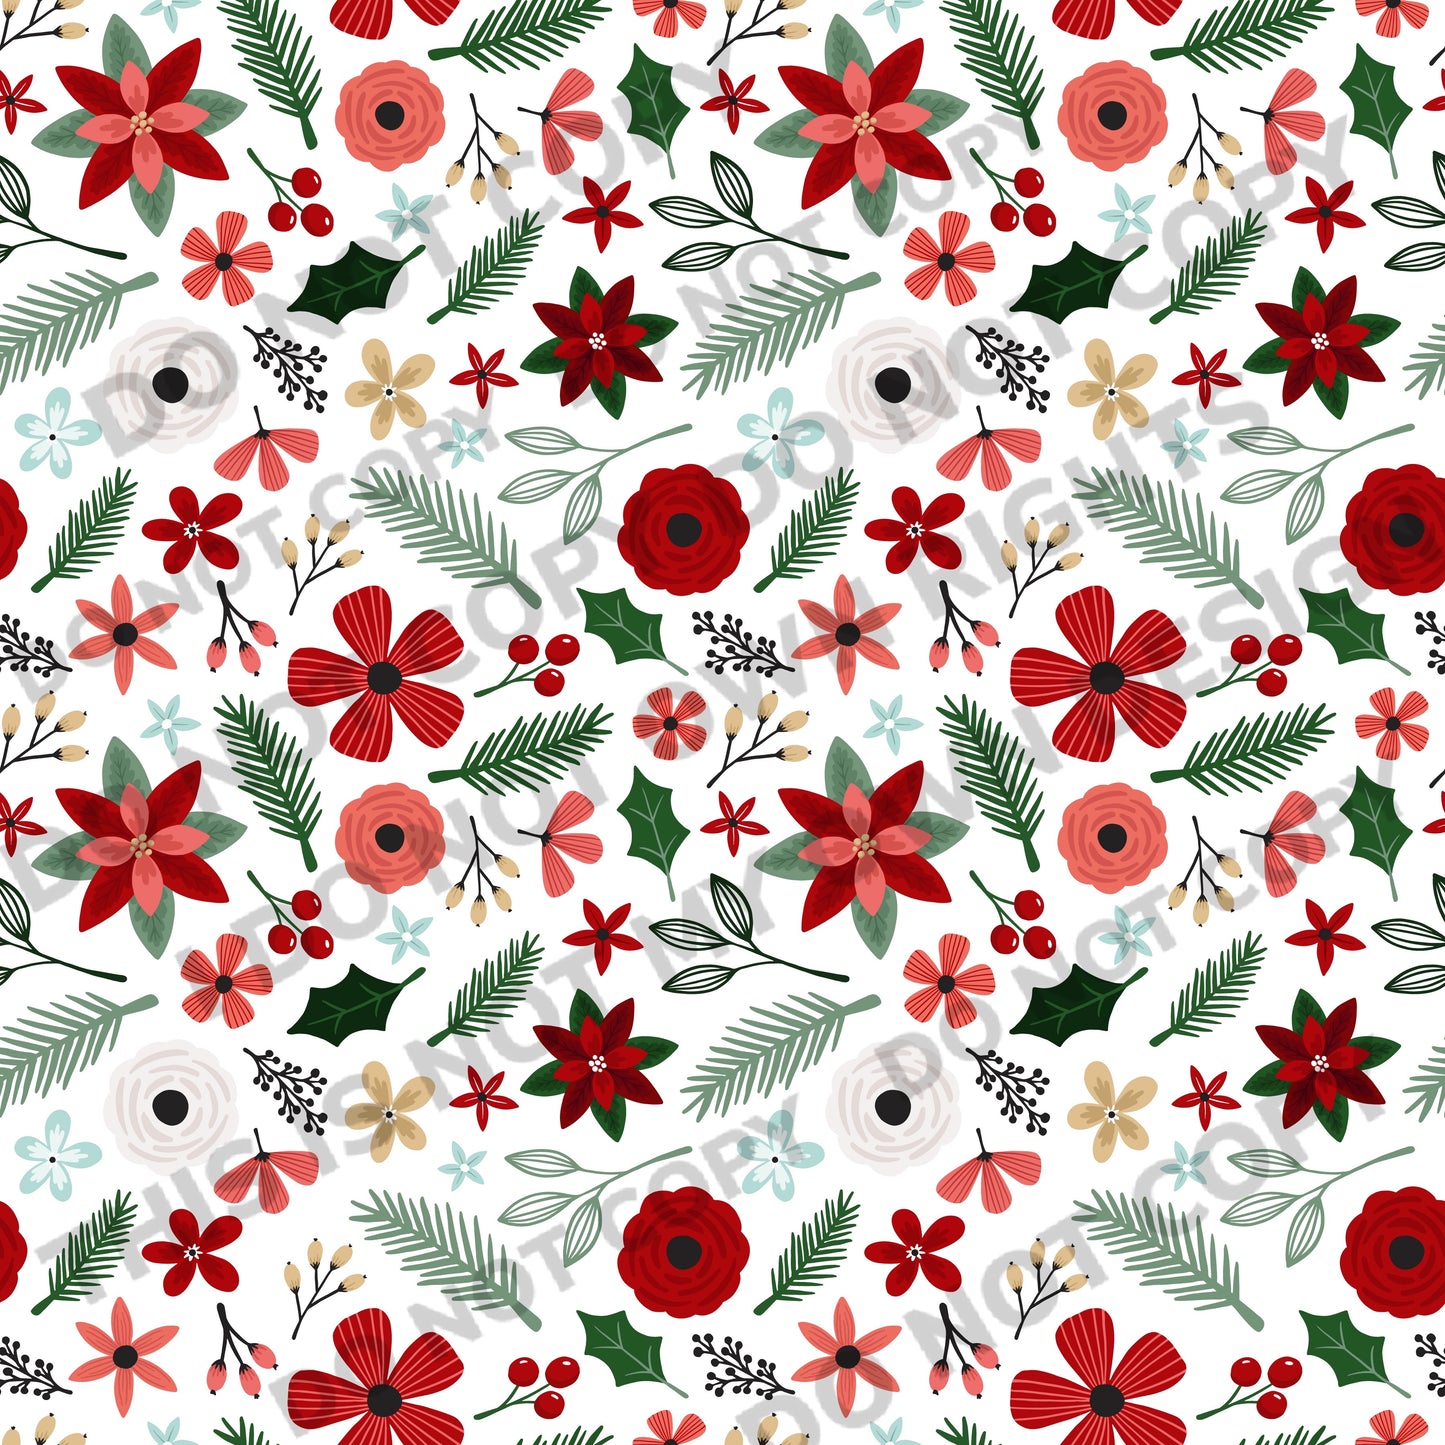 Merry Berry Christmas Floral Printed Fabric Bullet/DBP/Leather